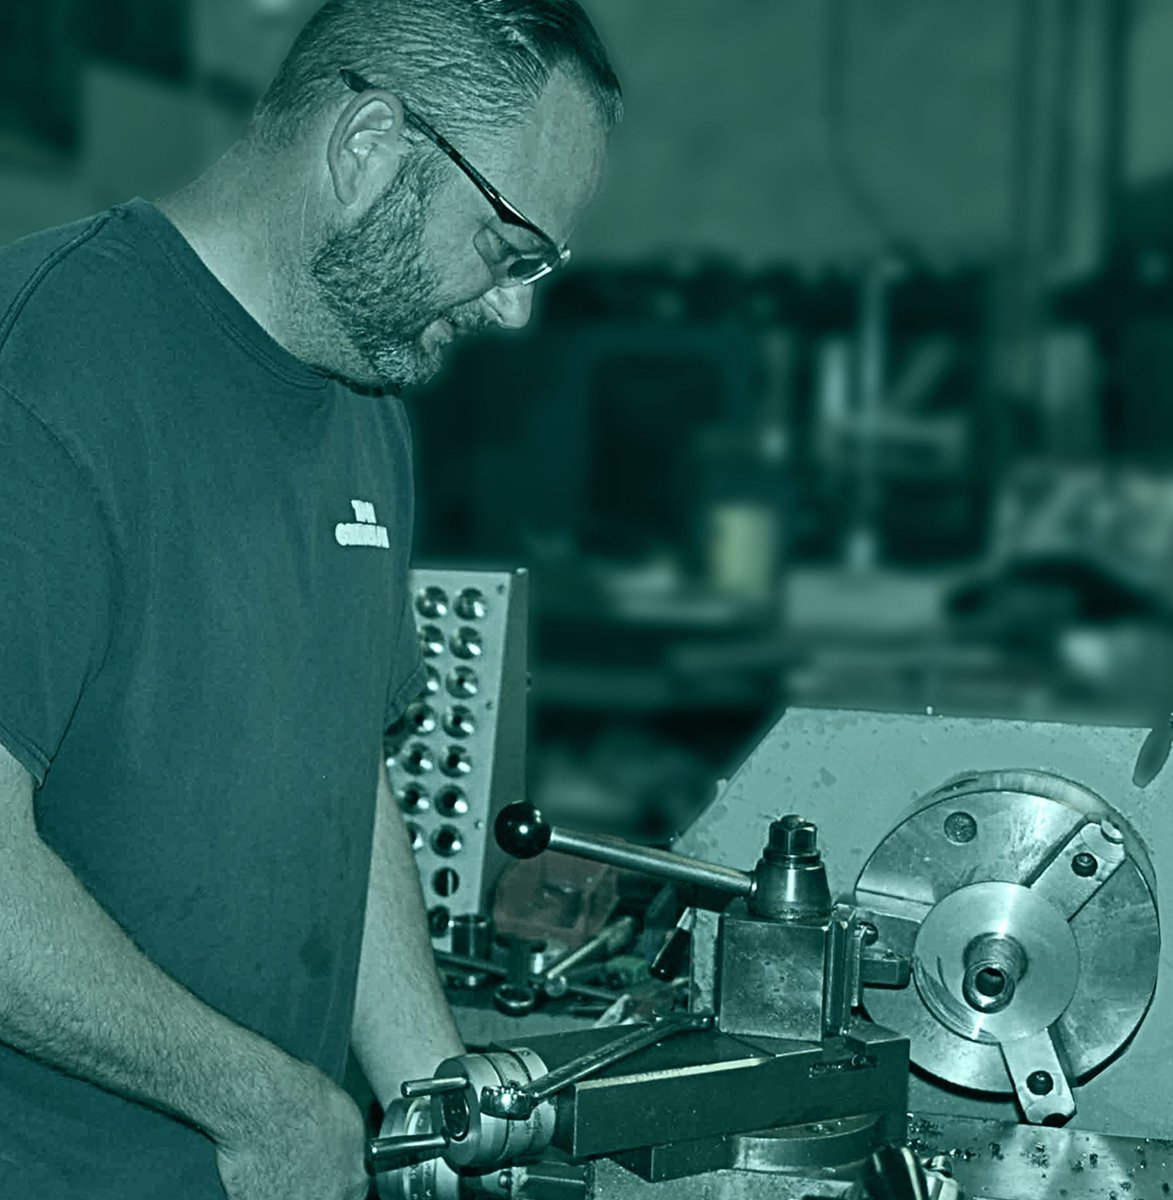 At Greenslade, we offer custom gage design services to meet your objectives. Once we’ve established the best approach, we’ll design a simple, cost-effective solution. With Greenslade, you can trust that your gage needs are in good hands.